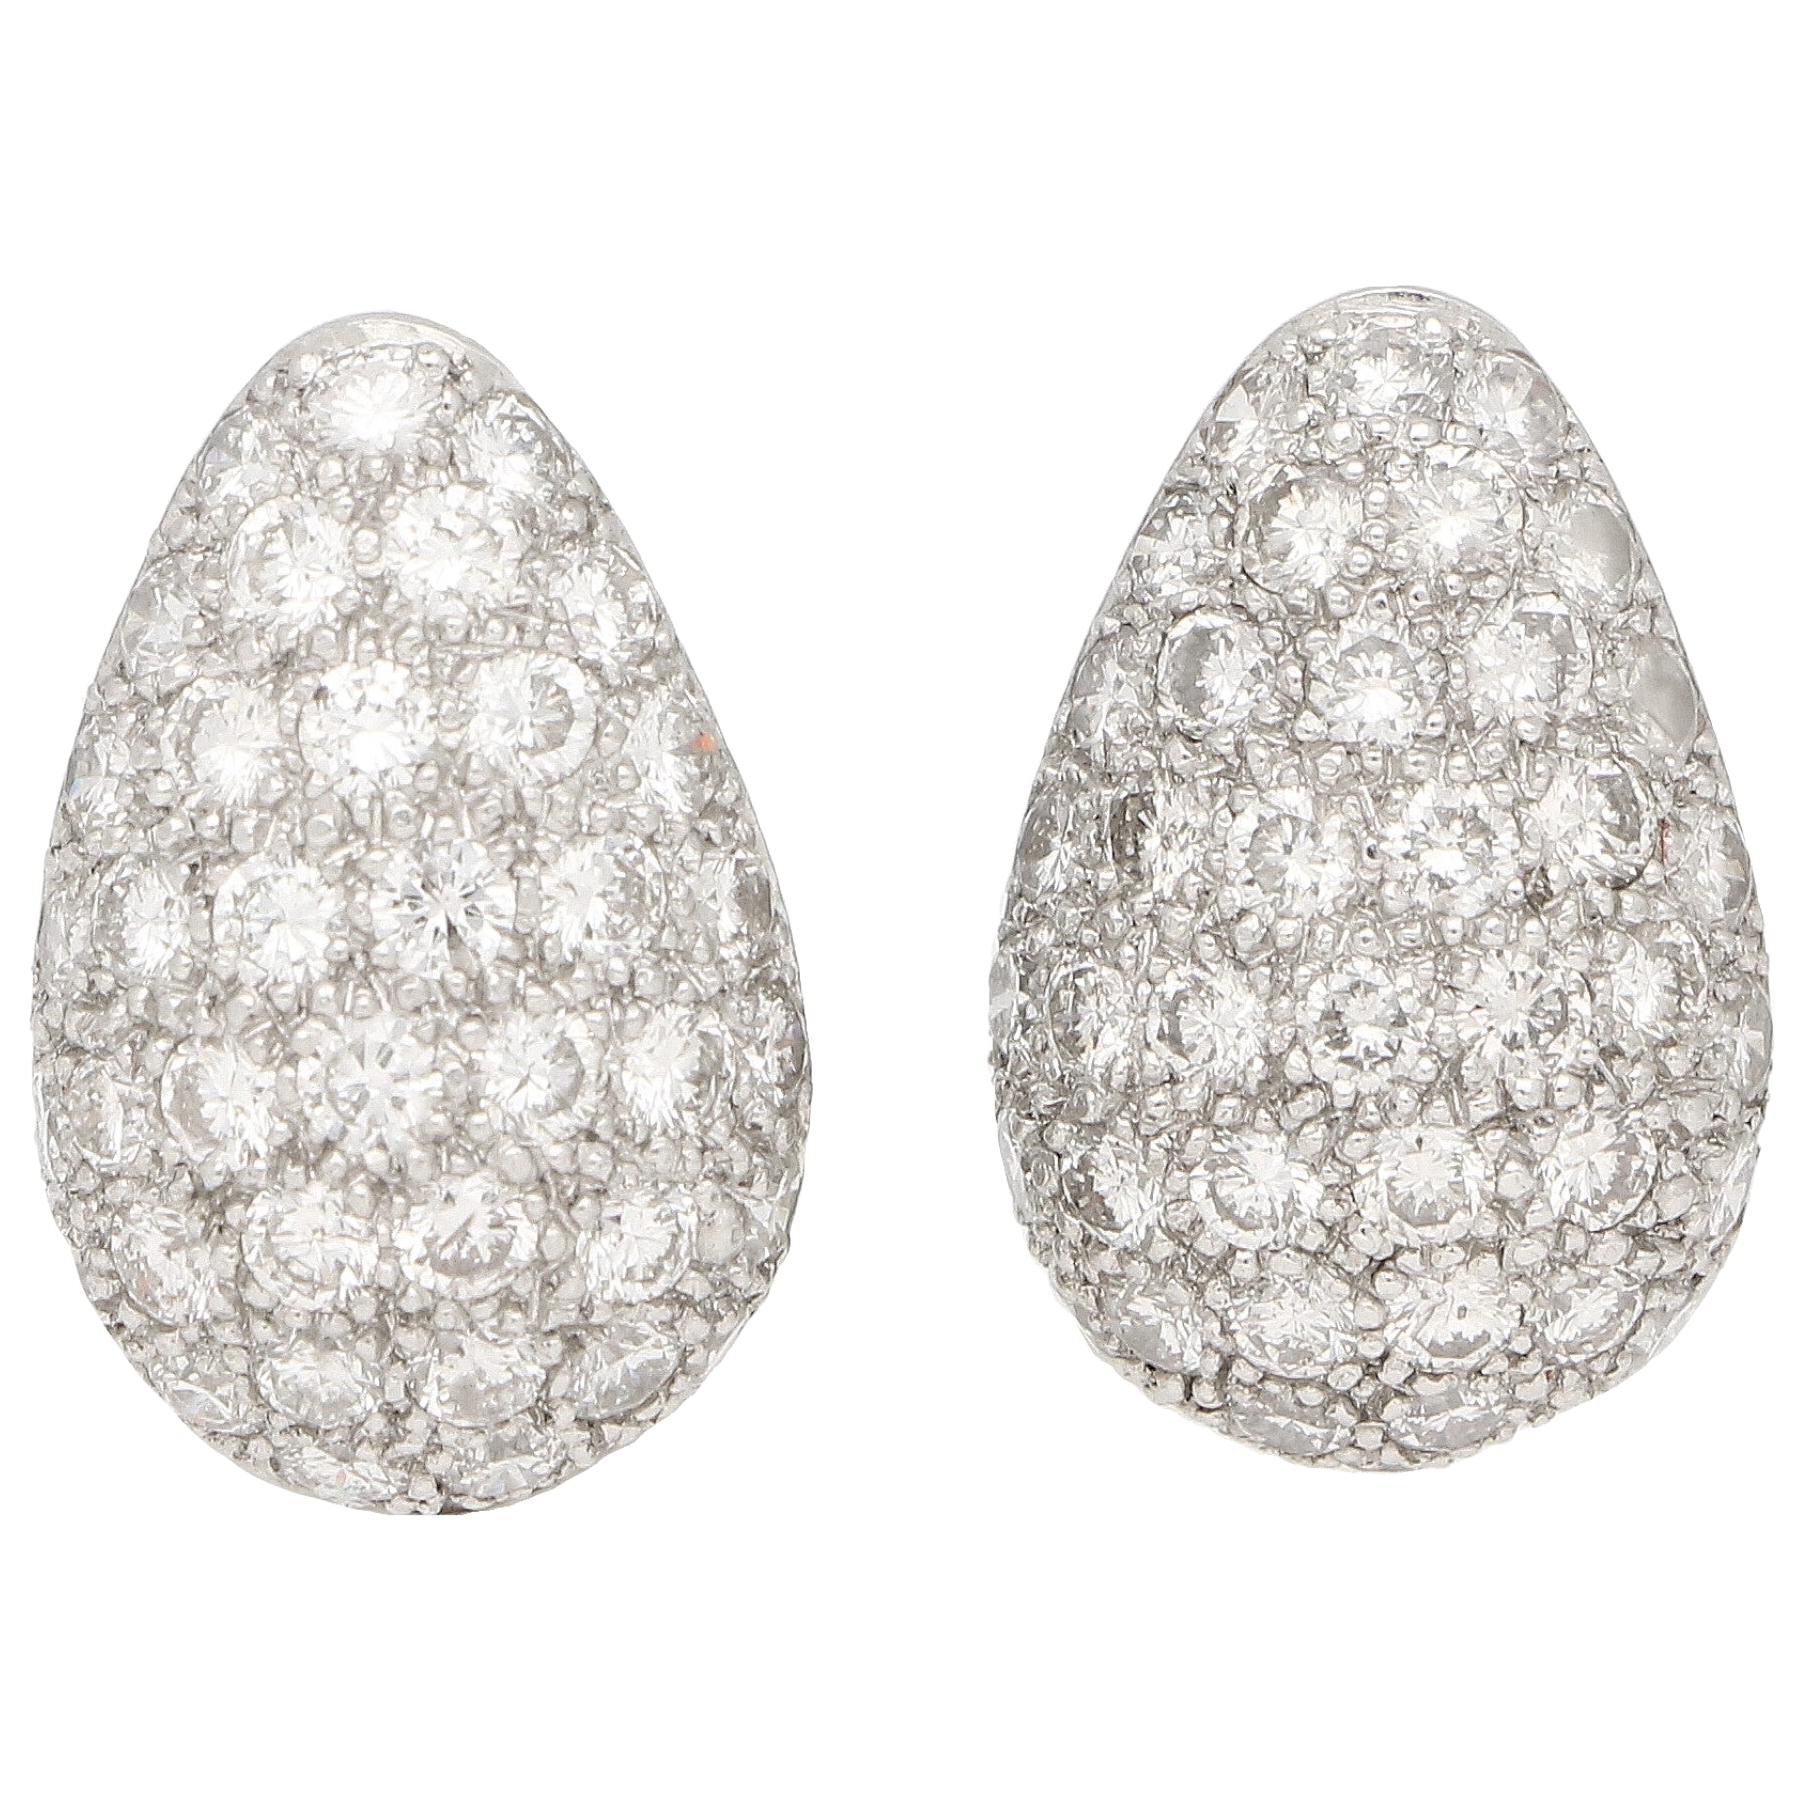 Diamond Pear Shaped Earrings Set in Platinum For Sale